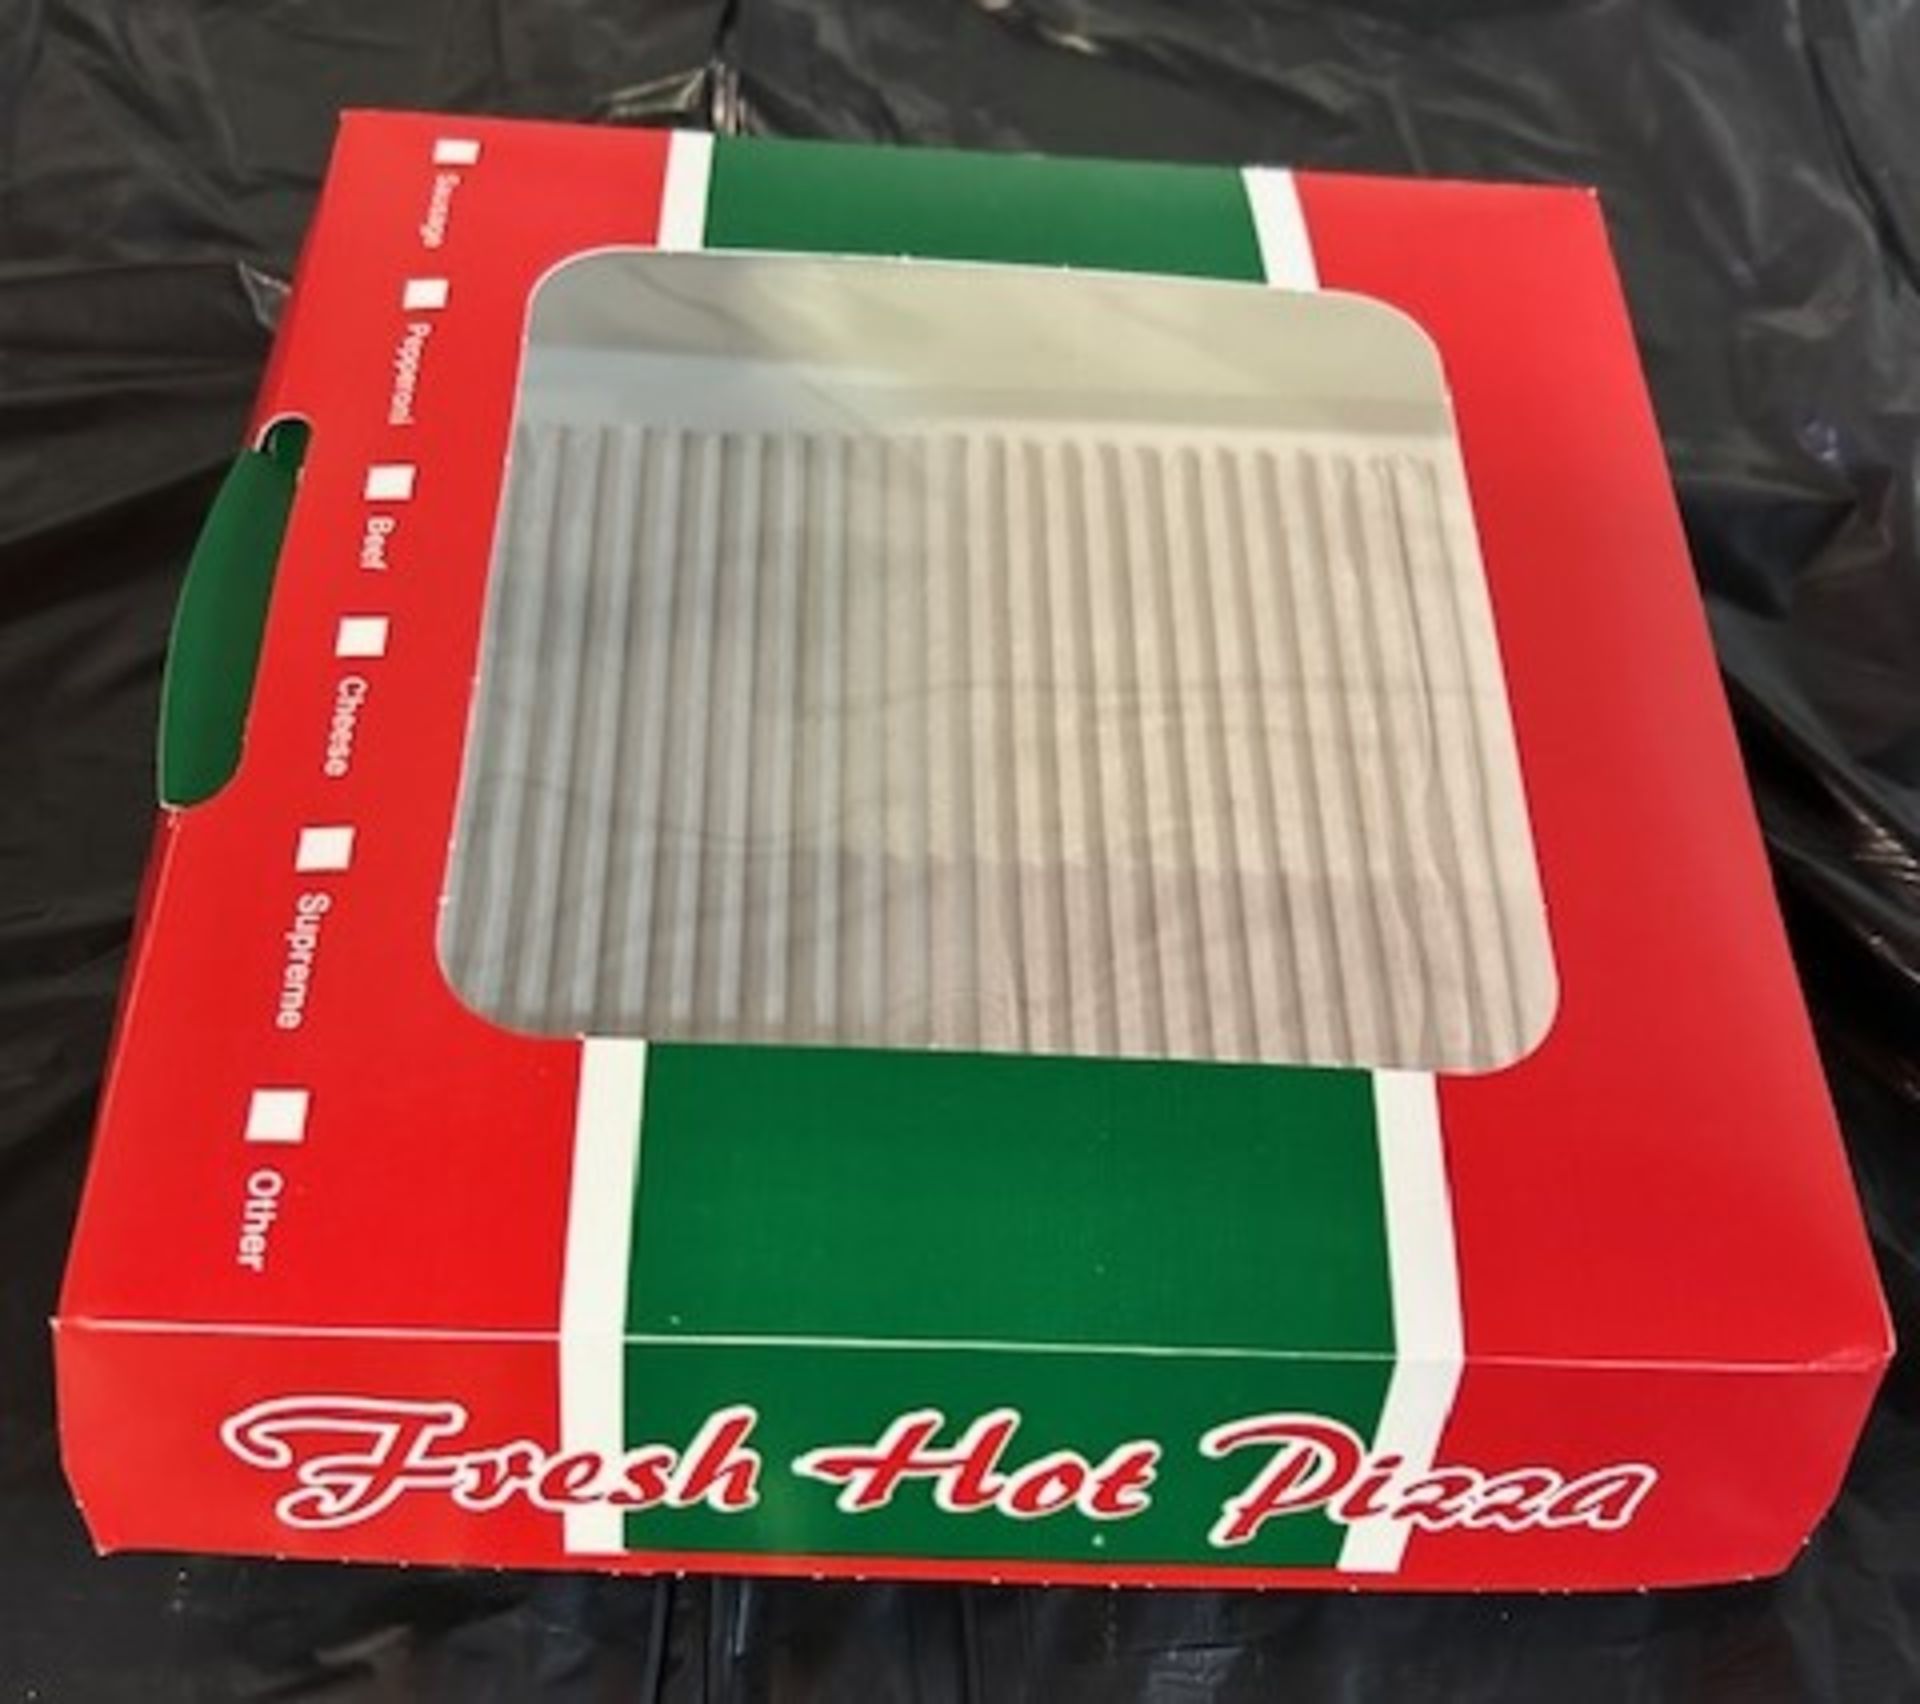 (2) Cases - 7" Pizza Clamshell with Pad (Pack 250)